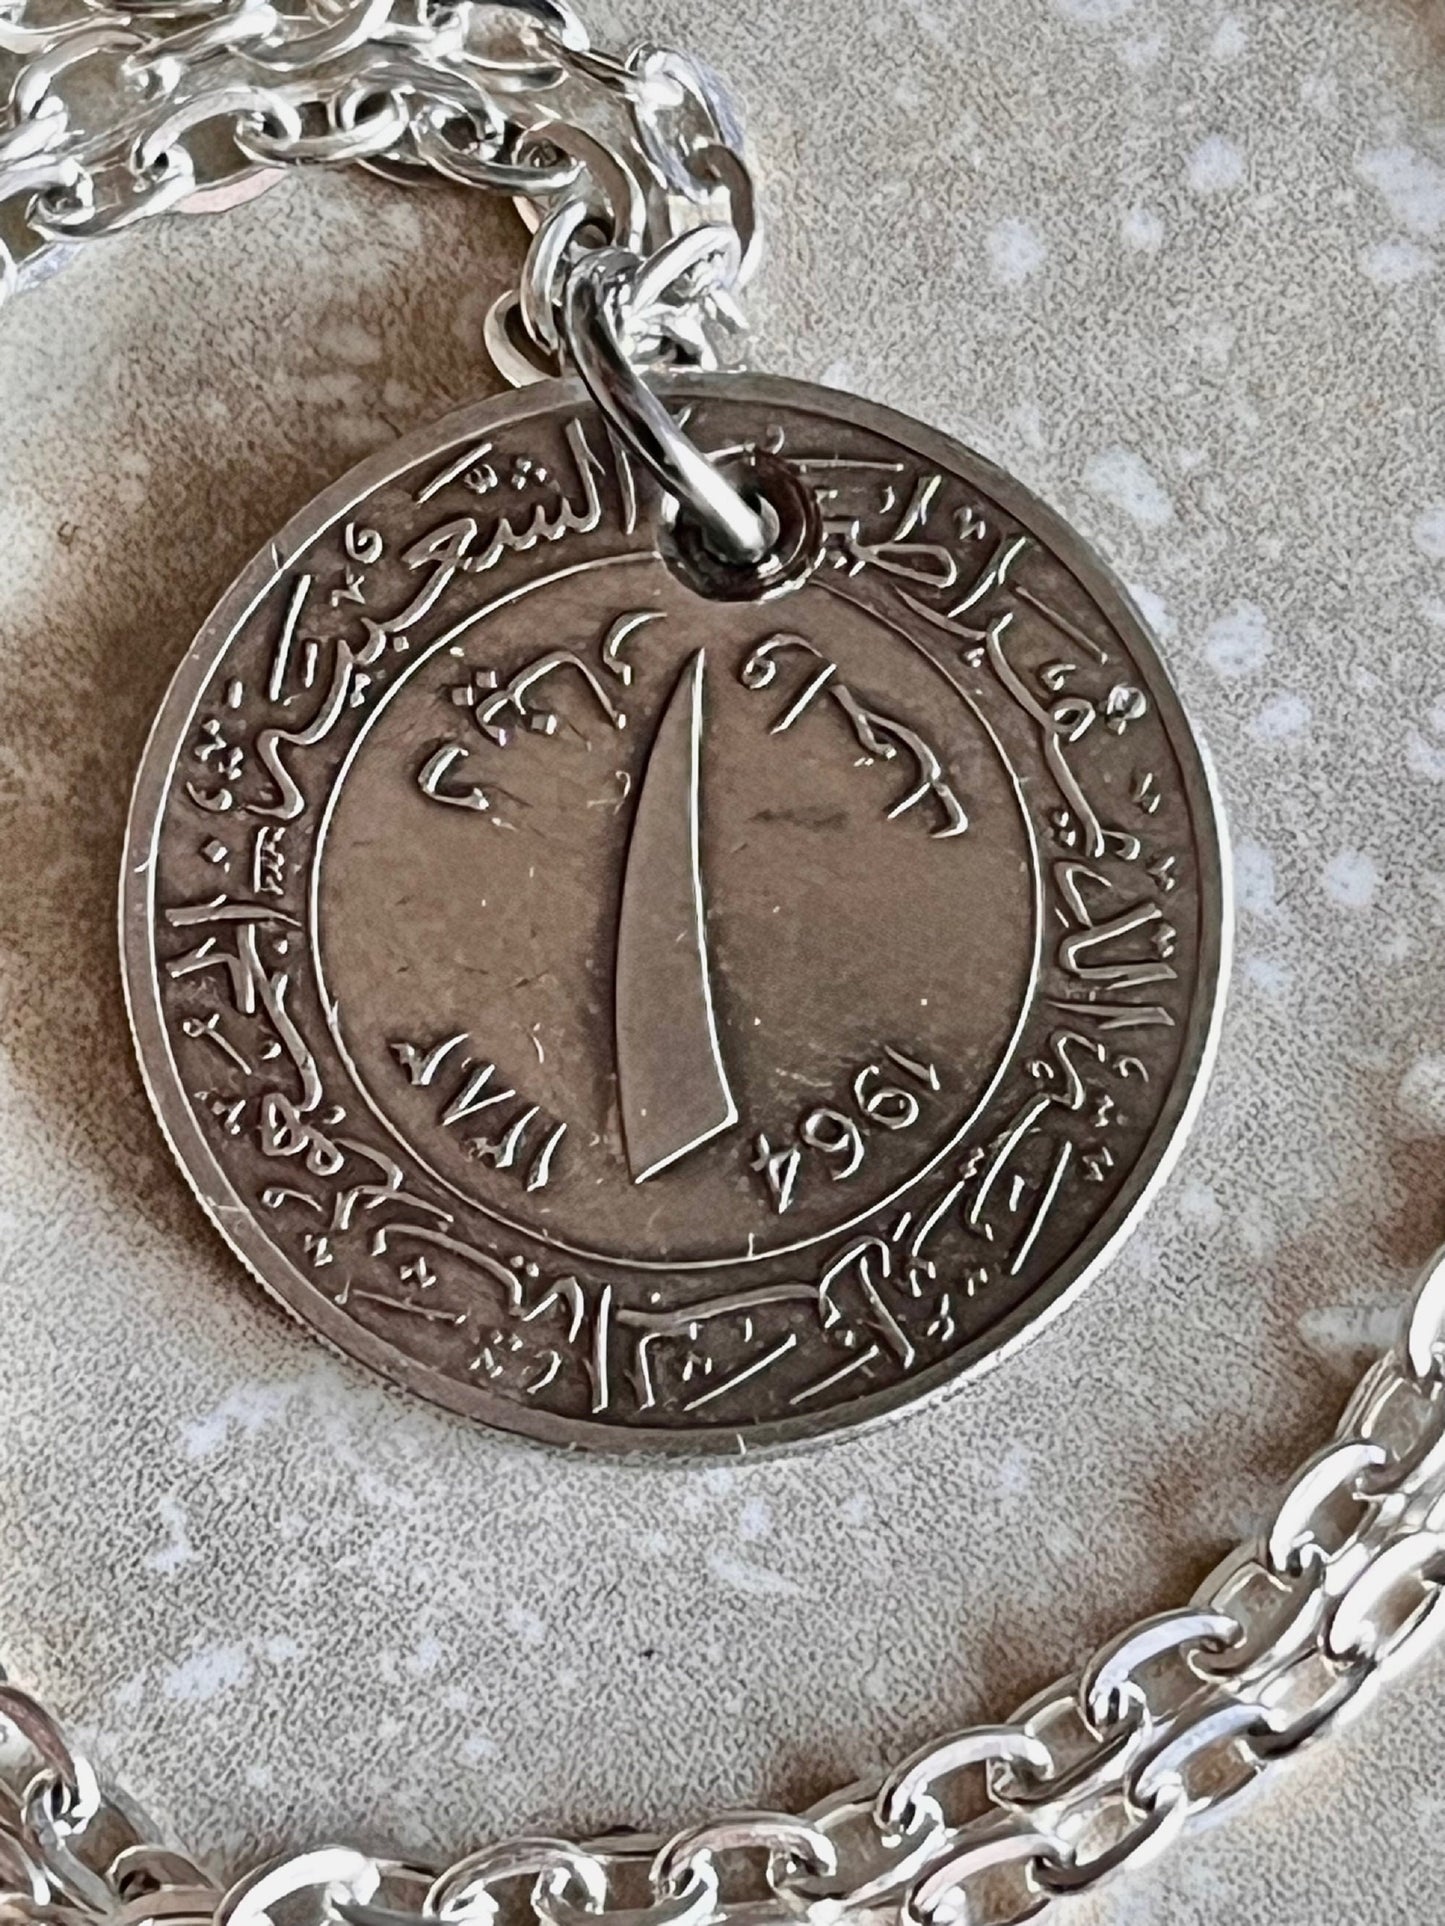 Algeria 5 Centimes Coin Pendant Algerian Personal Necklace Old Vintage Handmade Jewelry Gift Friend Charm For Him Her World Coin Collector